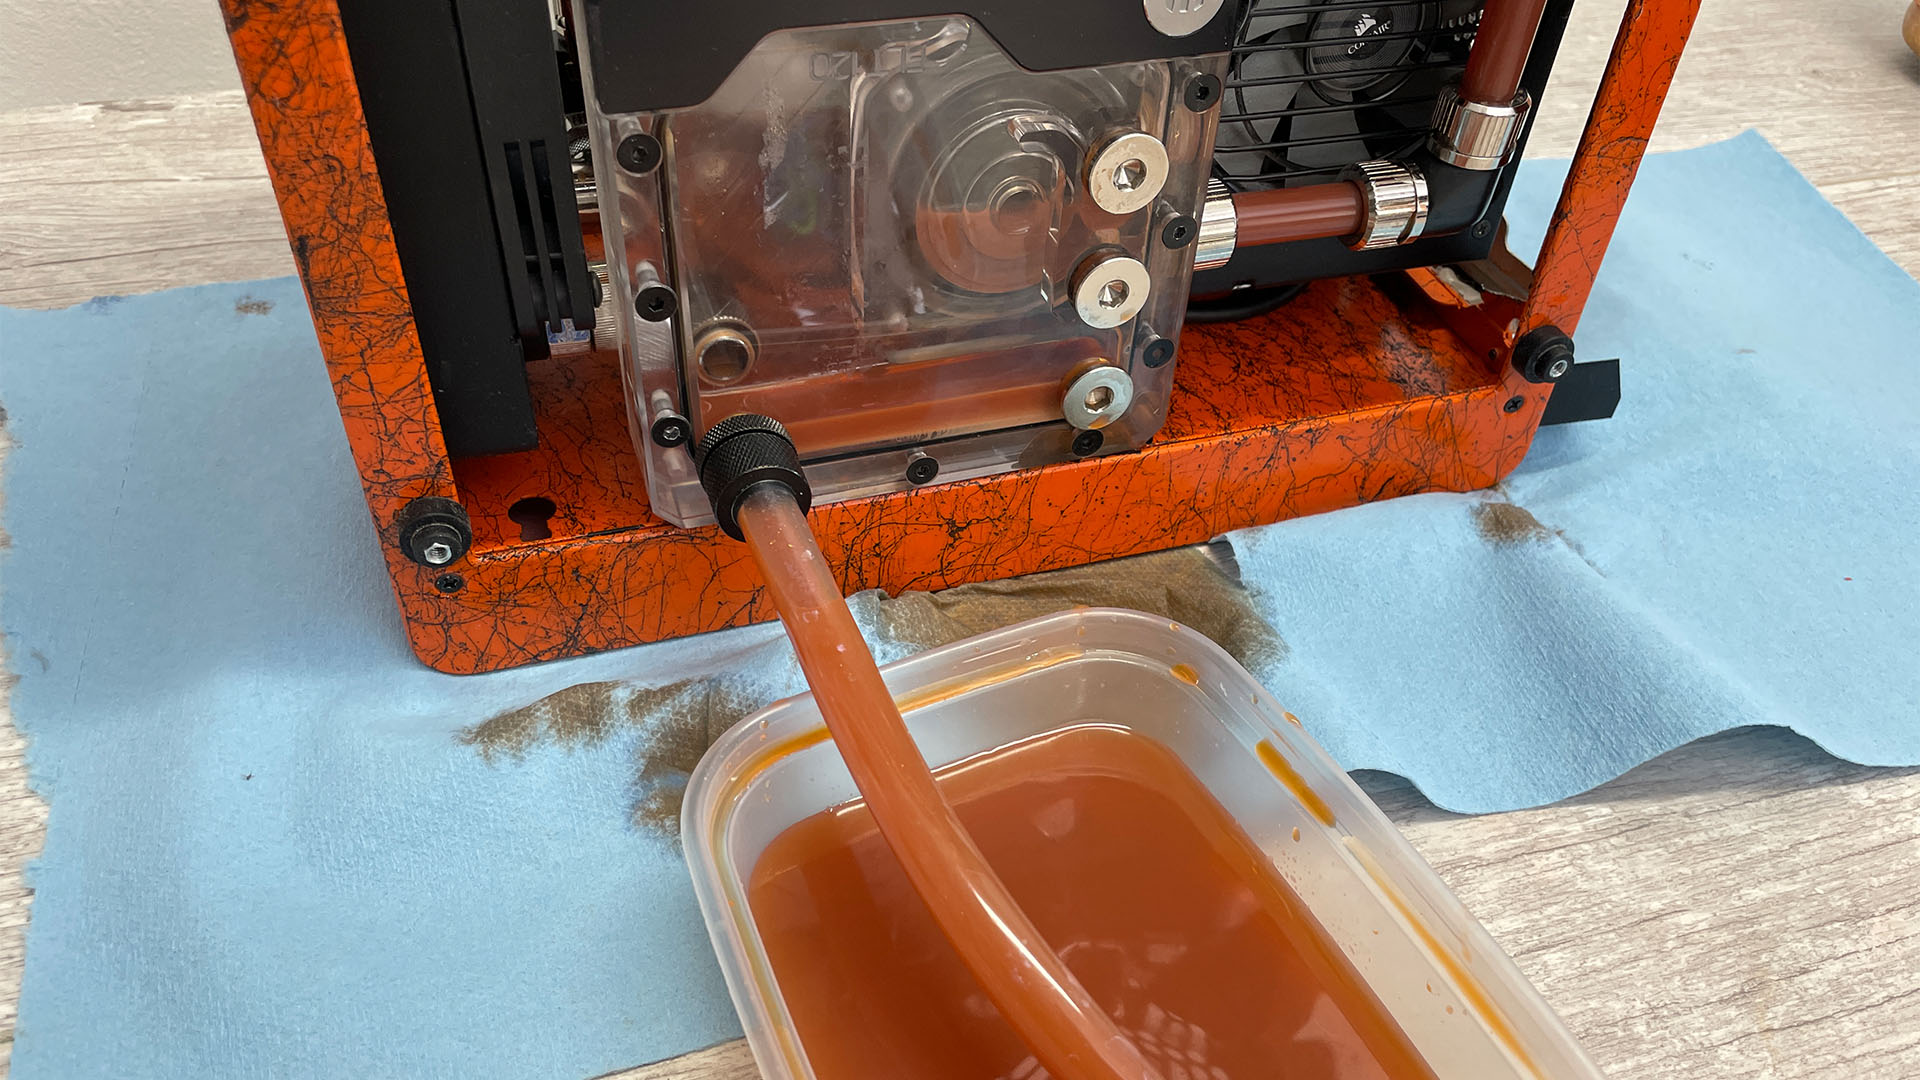 Draining a water-cooling loop